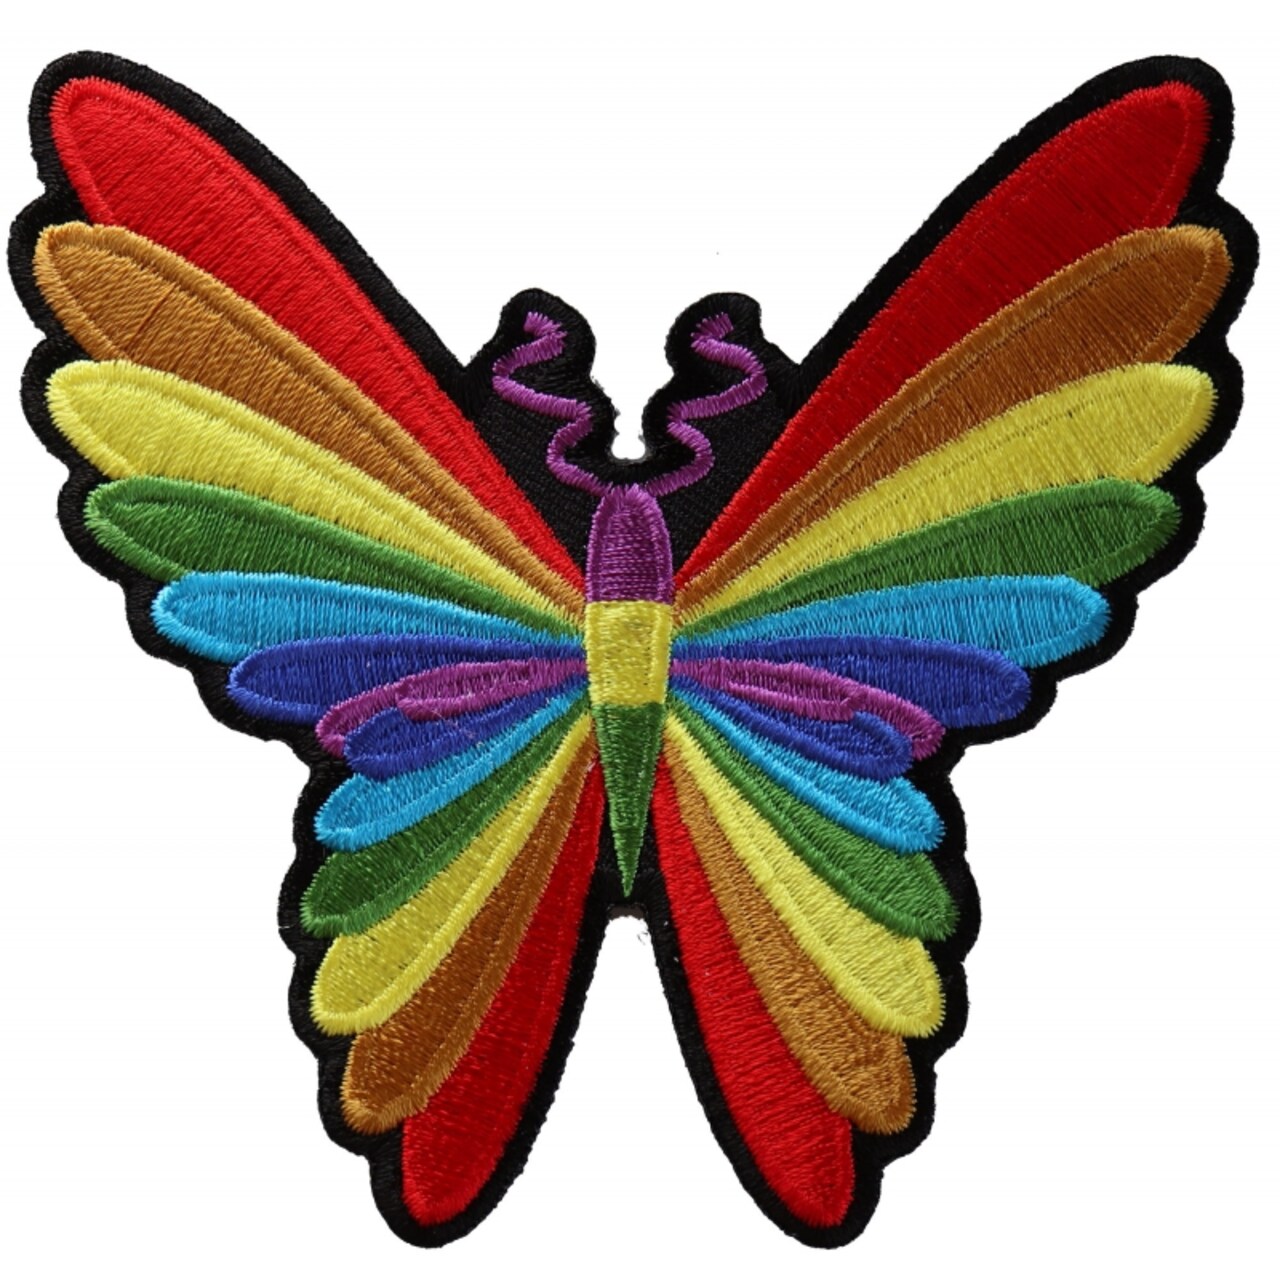 Patch, Embroidered Patch (Iron-On or Sew-On), Colorful Rainbow Butterfly,  4 x 4